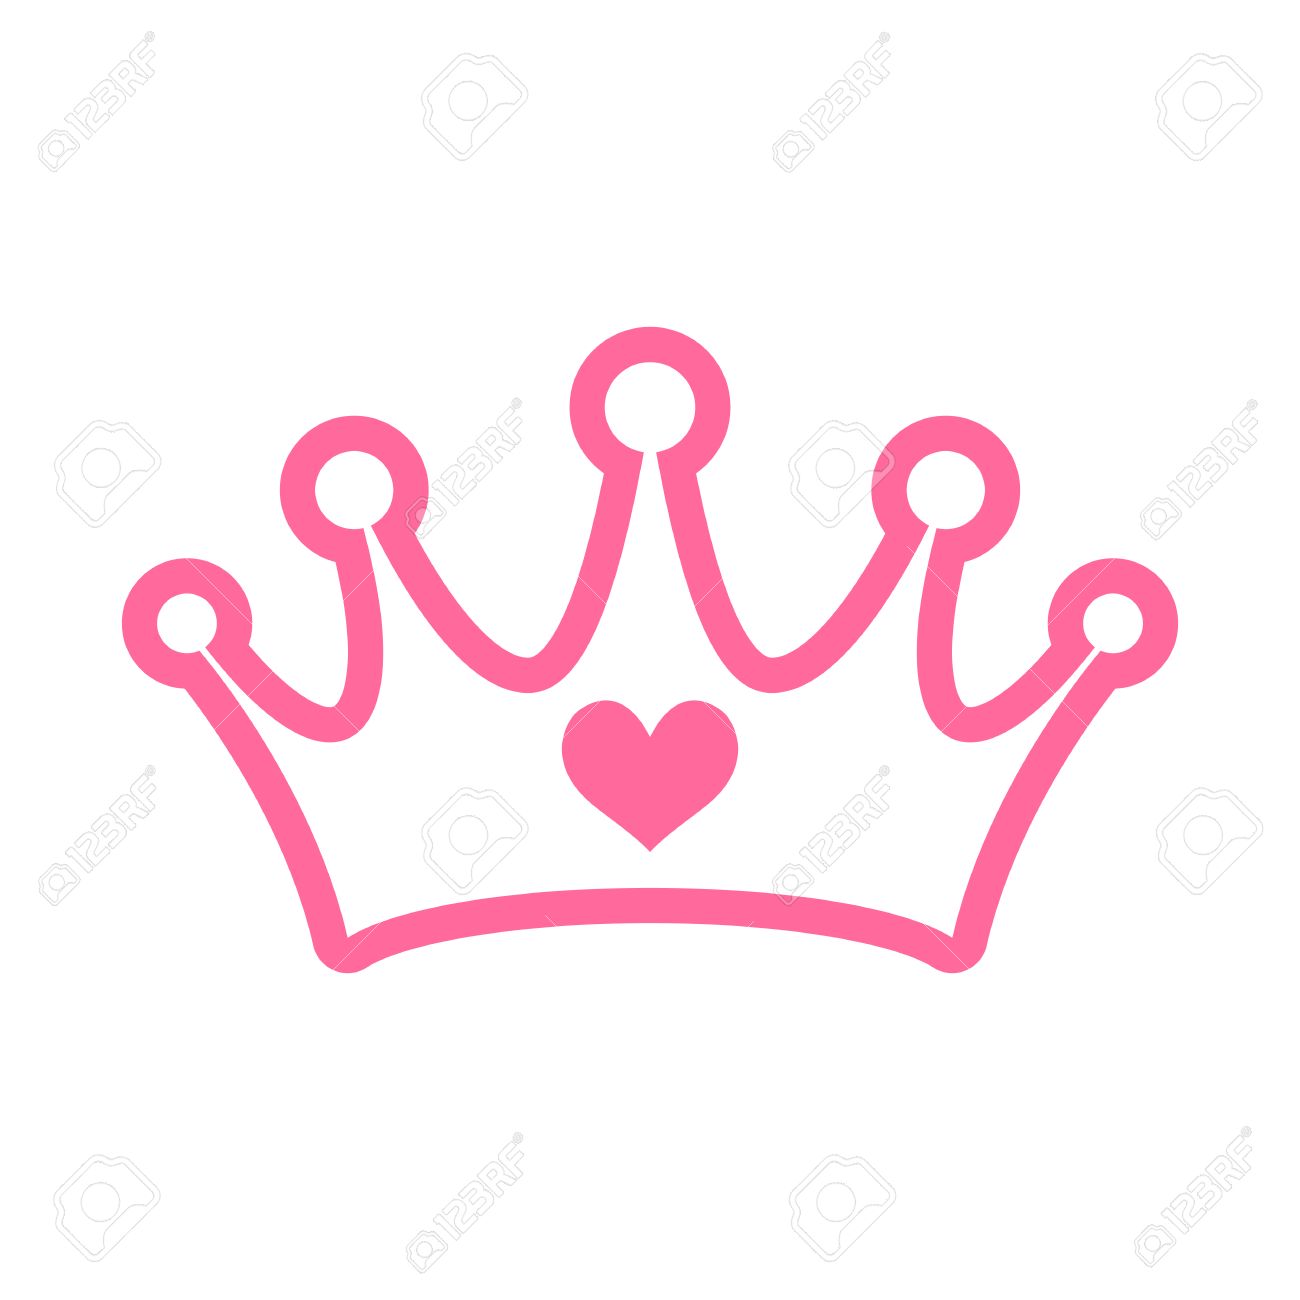 Crowns clipart girly. Collection of free tiara